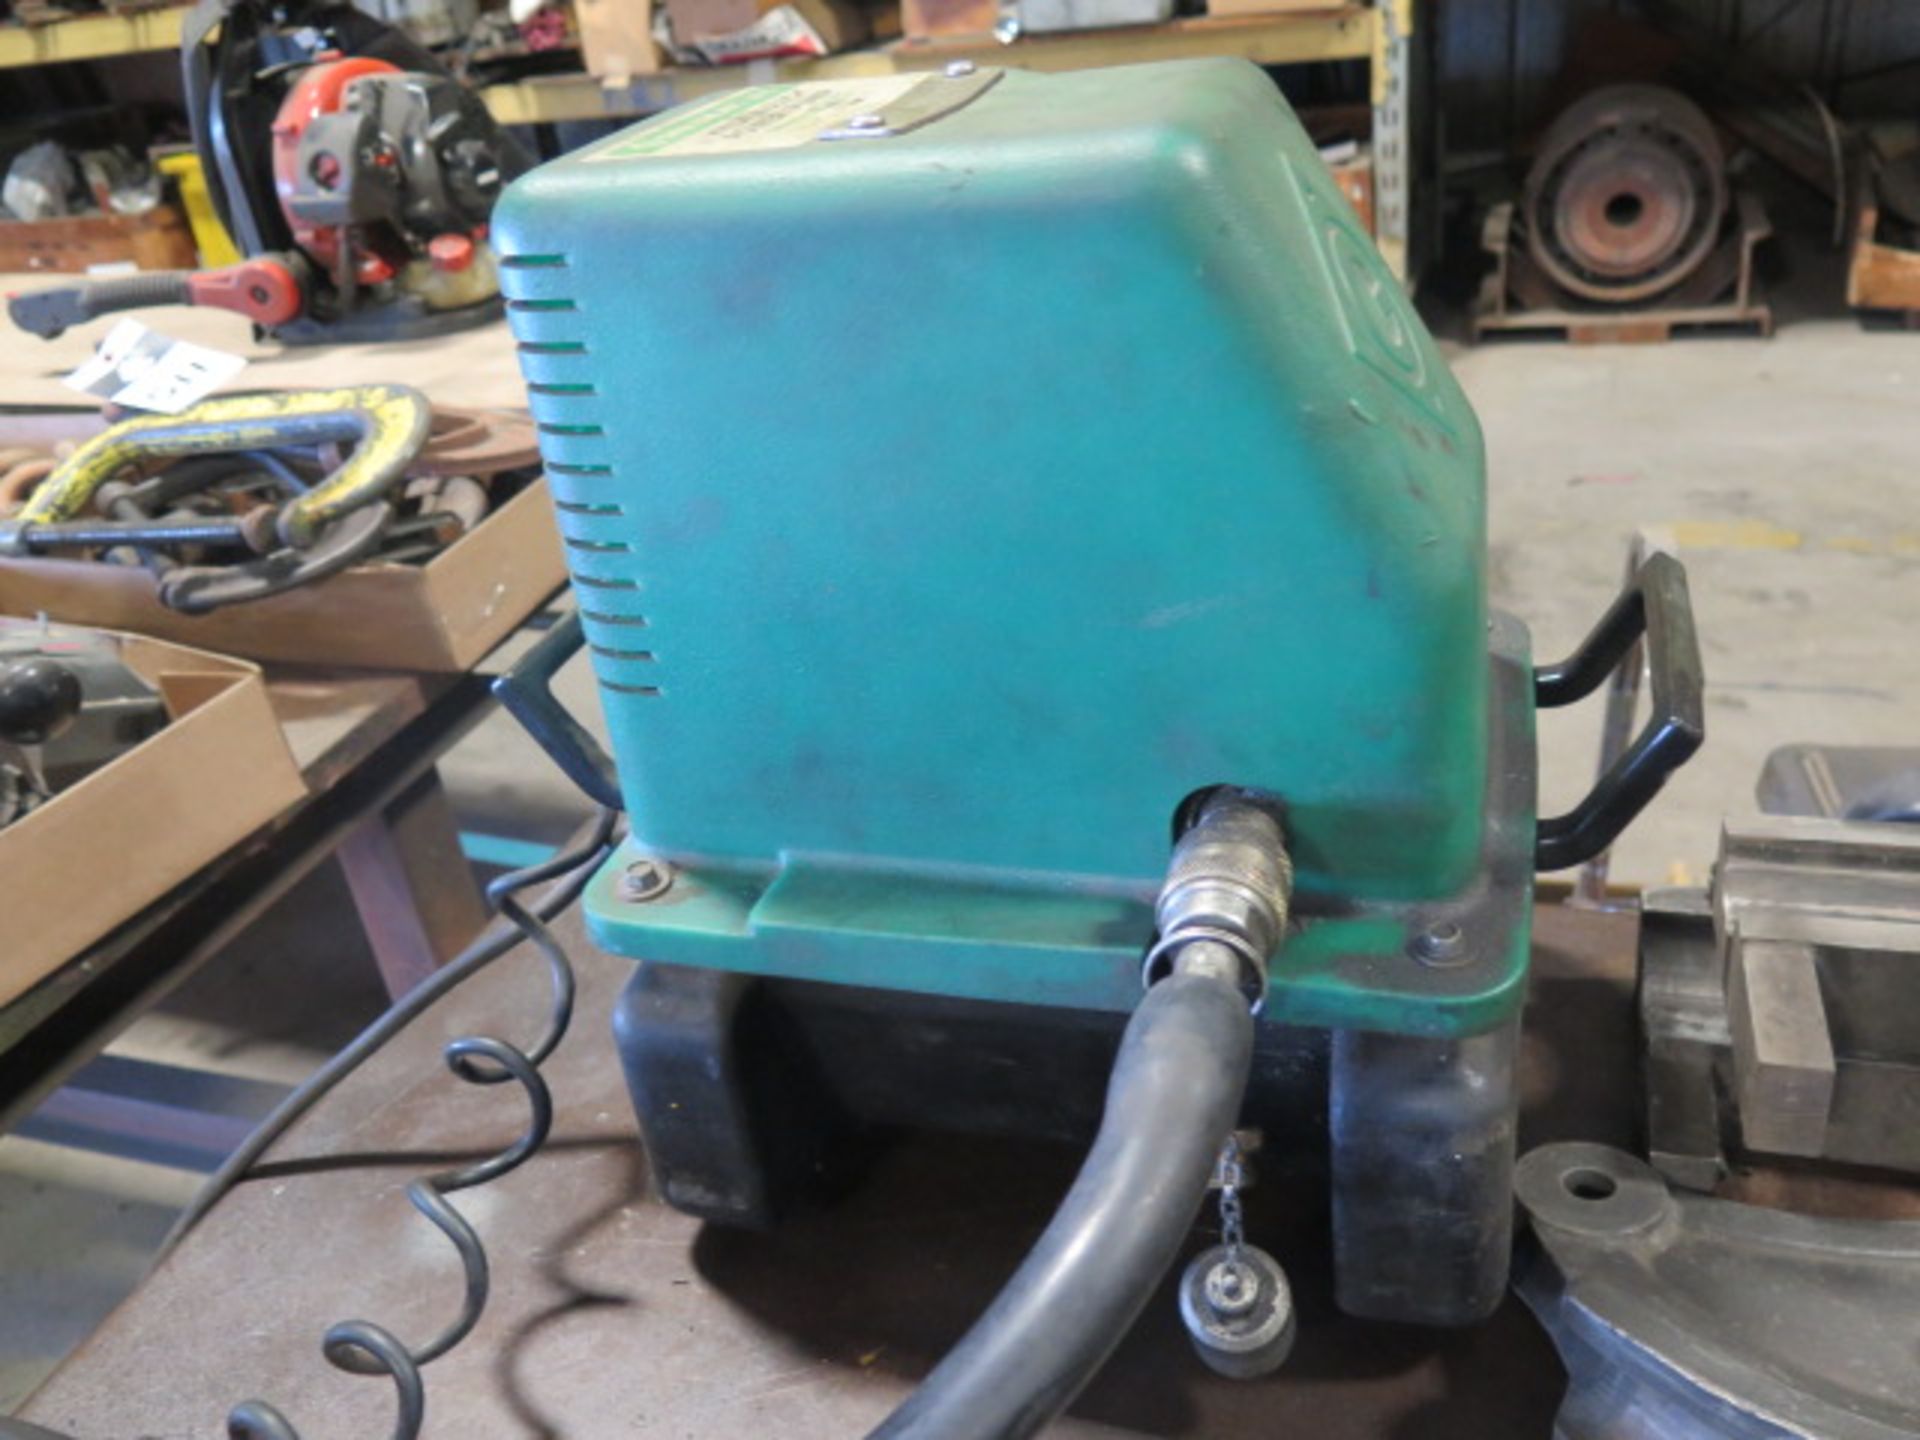 Greenlee Hydraulic Pipe Bender Set w/ Electric Hyd Power Unit, Bending Dies and Table SOLD AS IS - Image 6 of 11